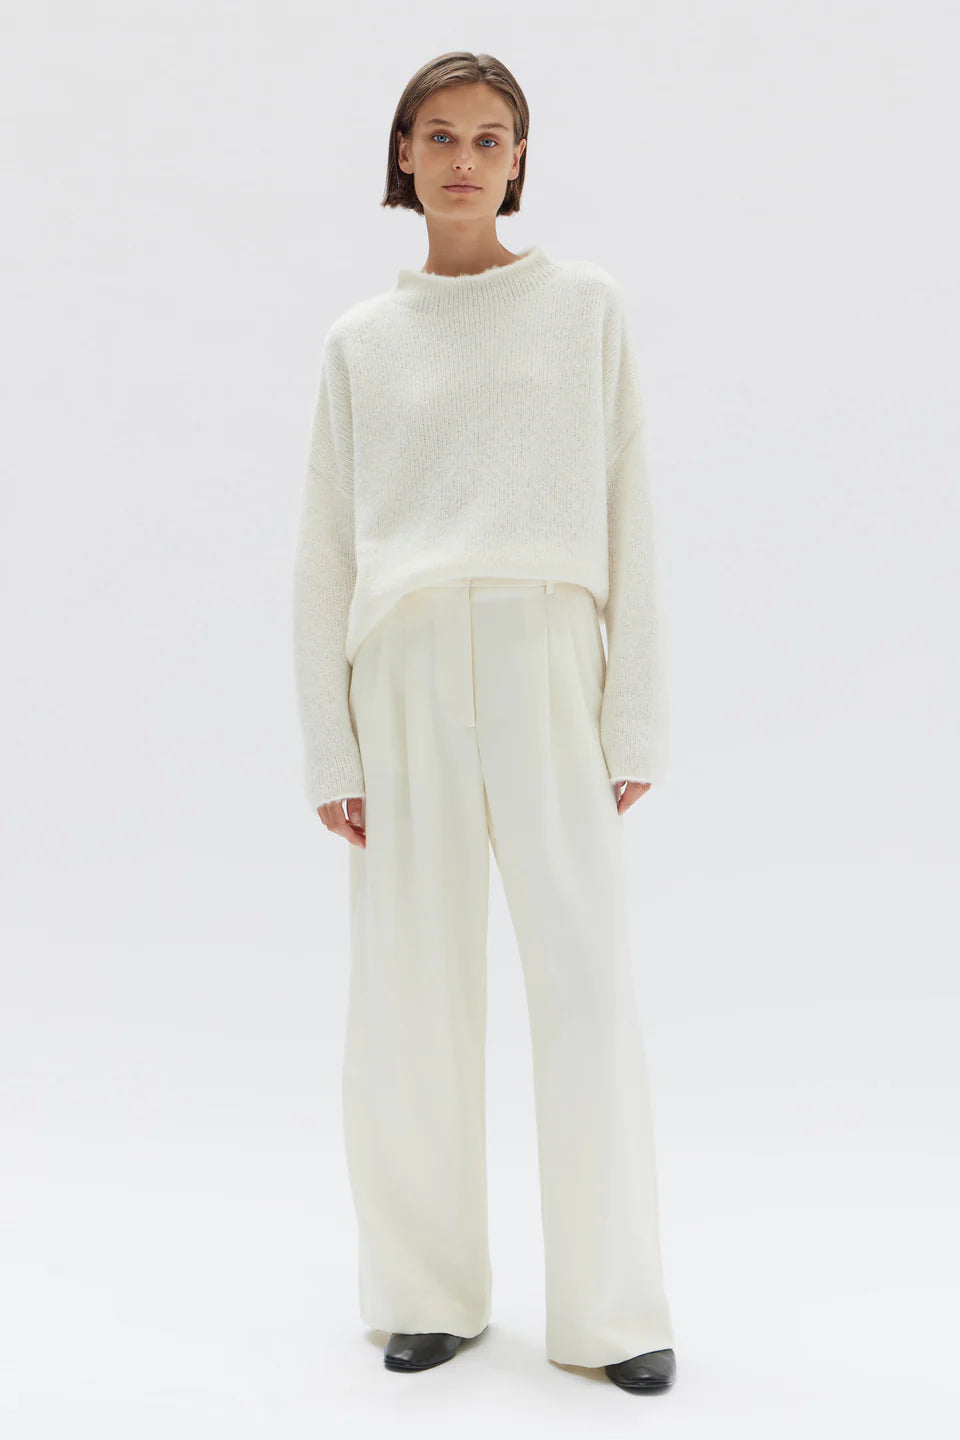 ASSEMBLY LABEL - APOLLINE KNIT - CREAM